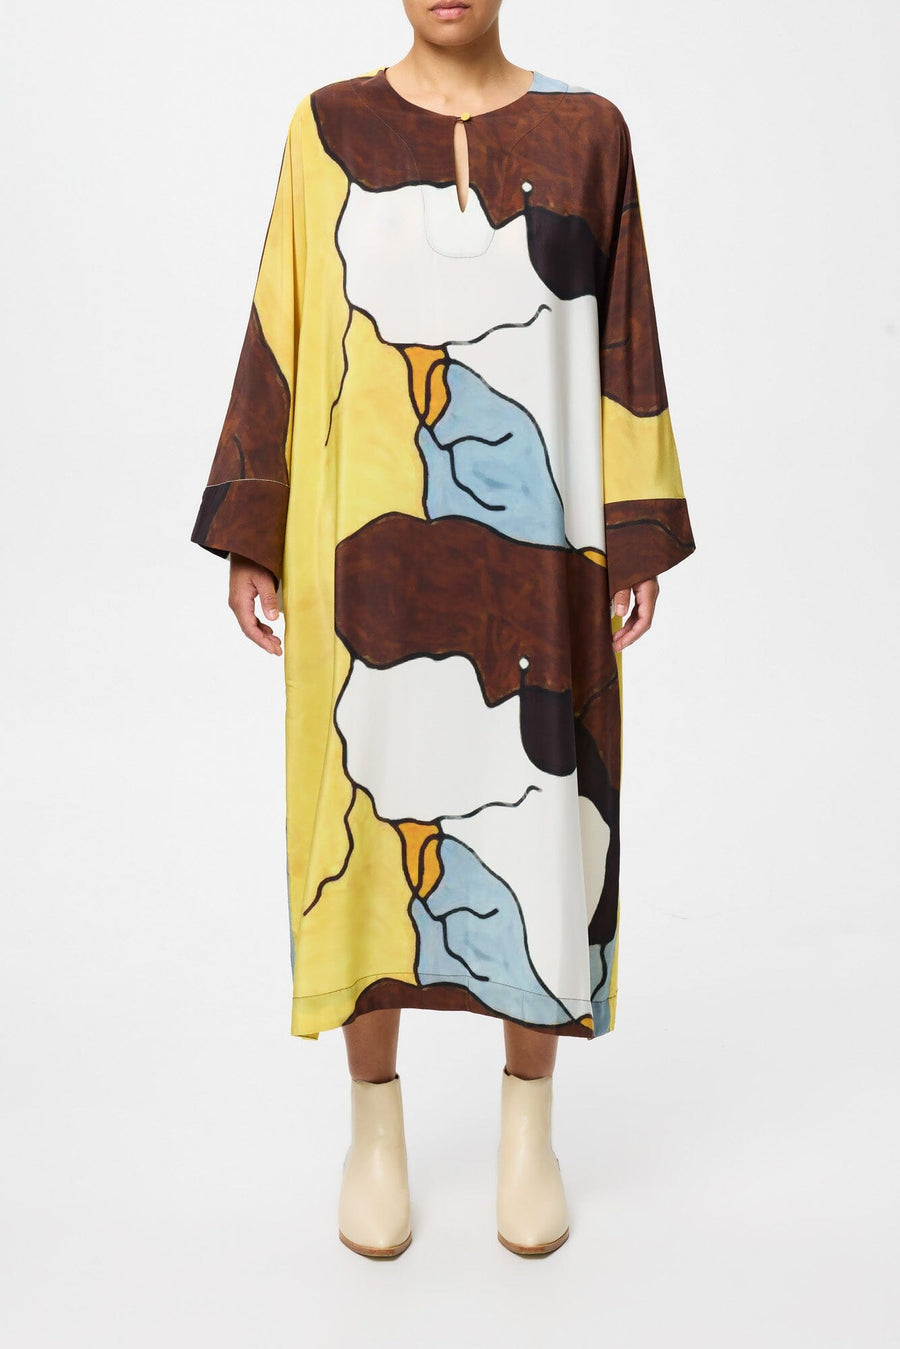 Common Ground Silk Kaftan - Late April Delivery